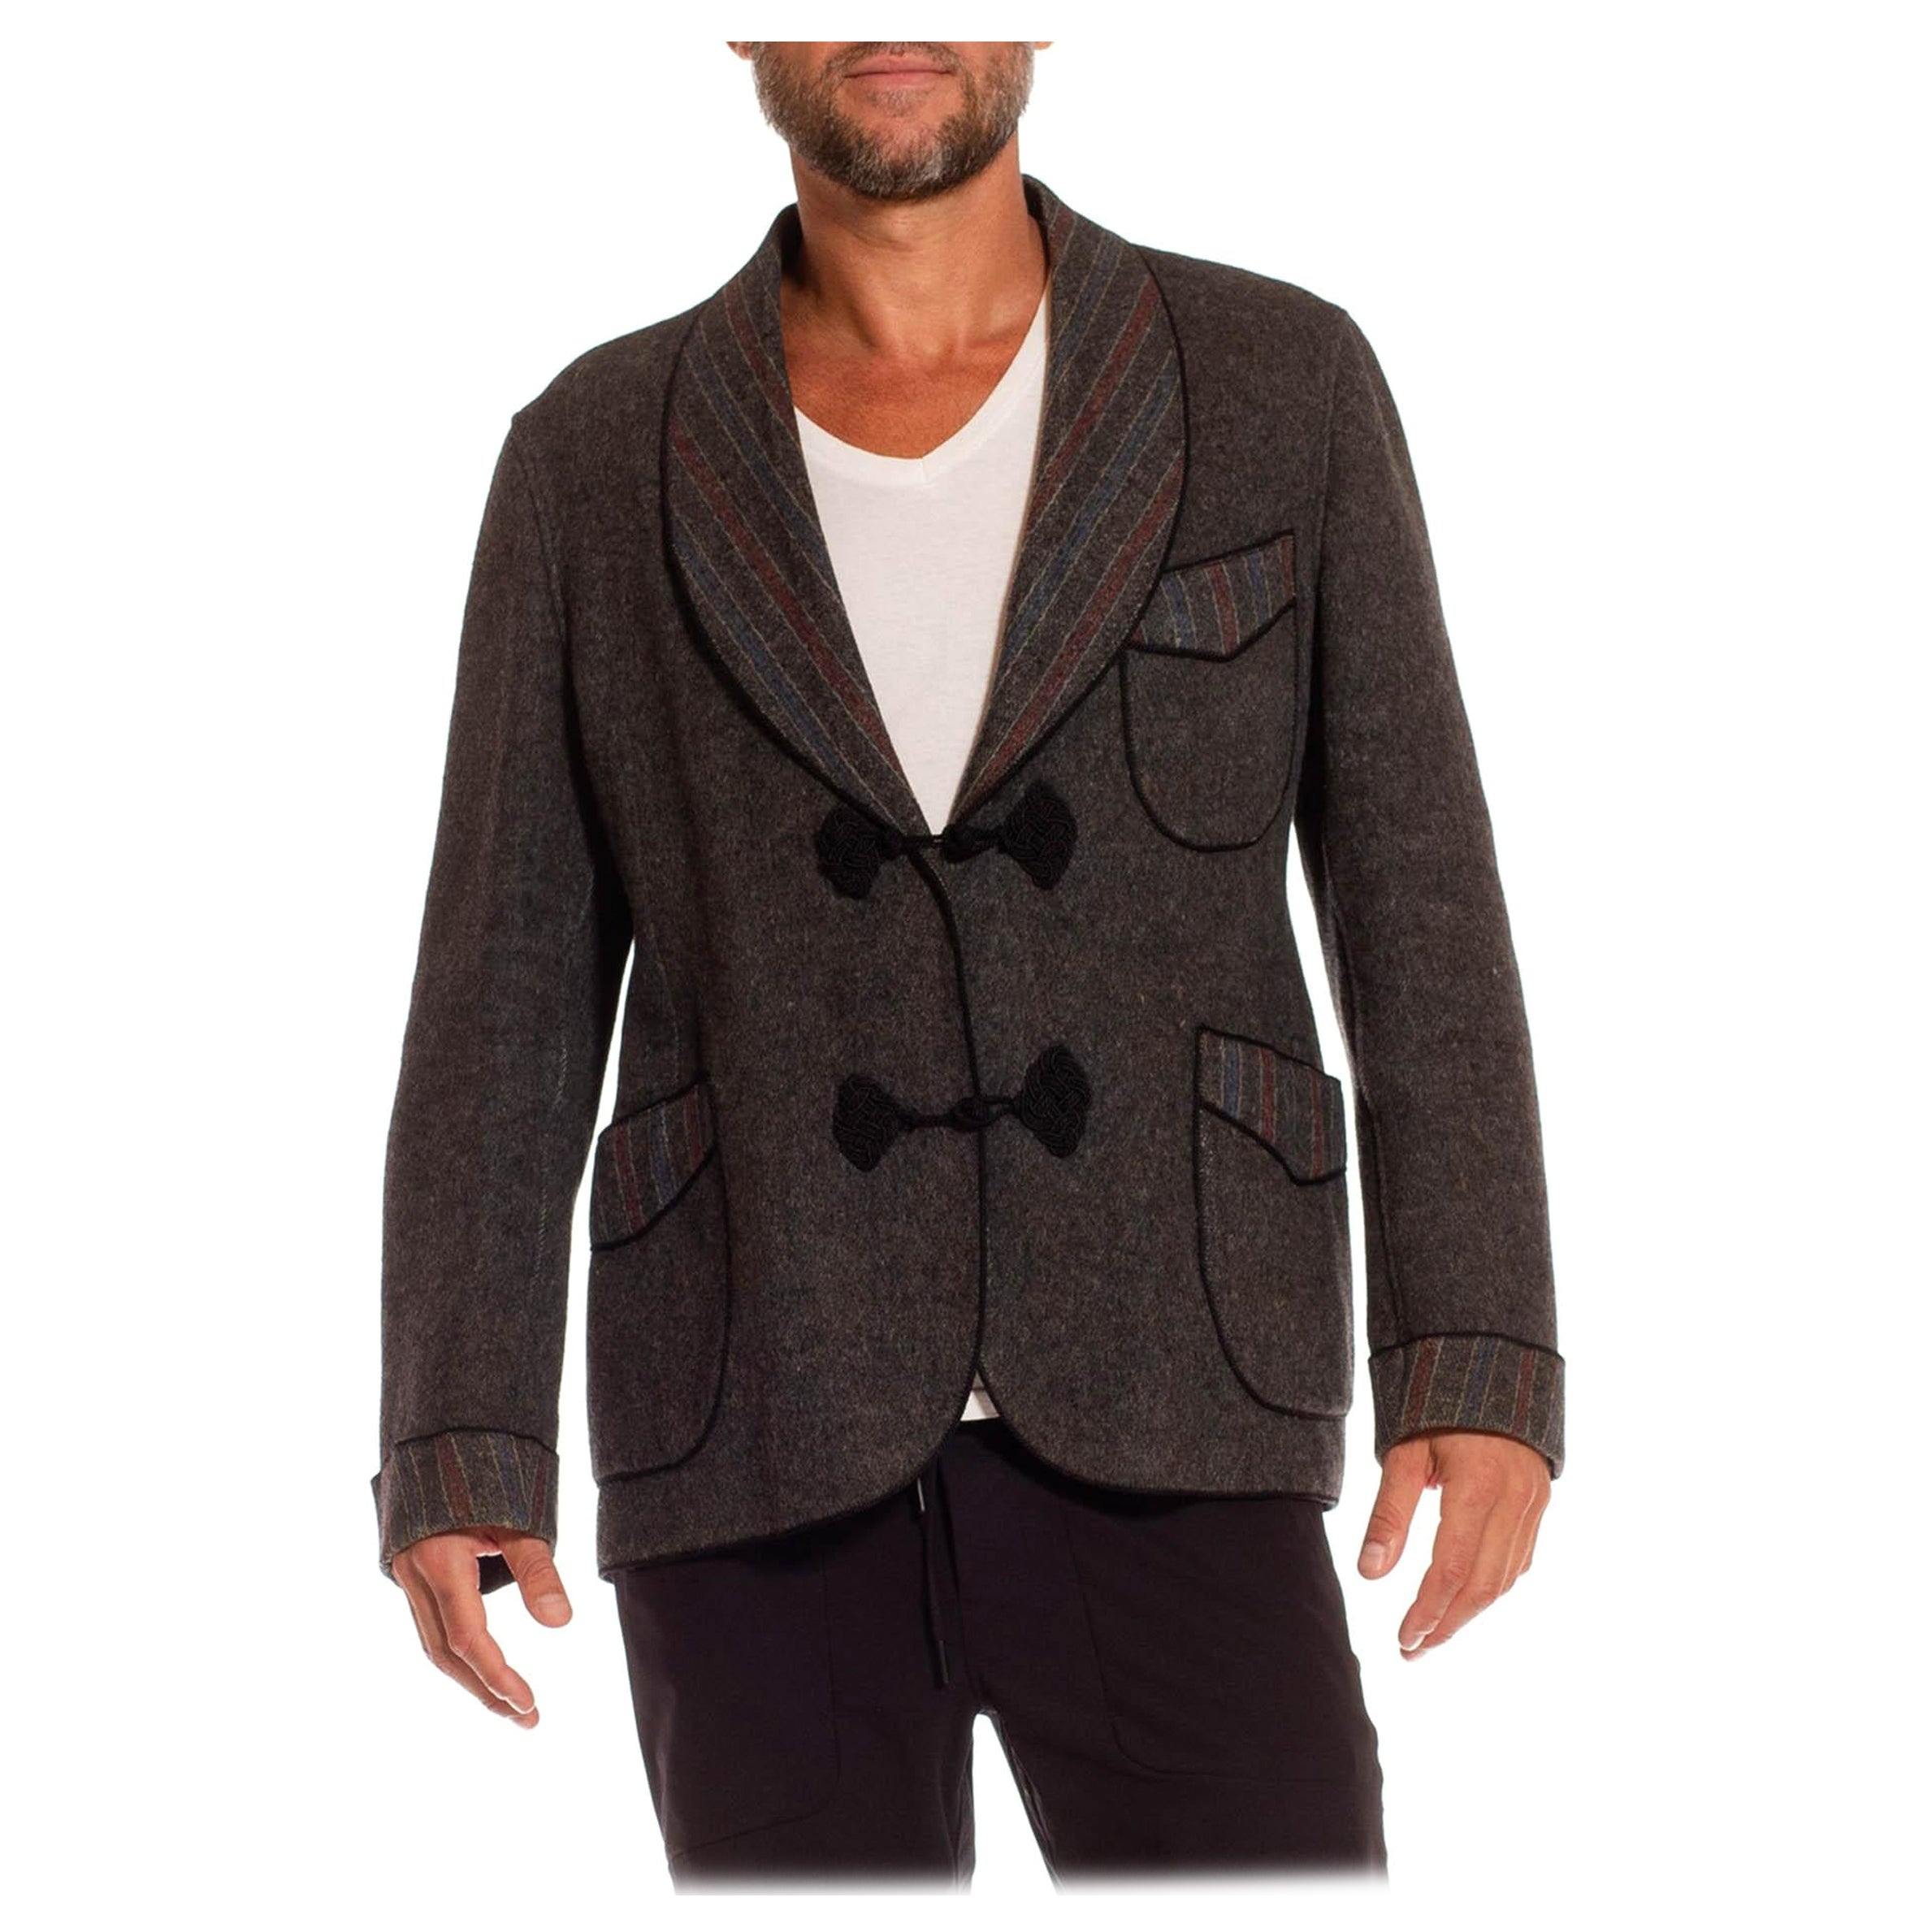 Victorian Heather Grey Wool Woven Men's Smoking Jacket For Sale at